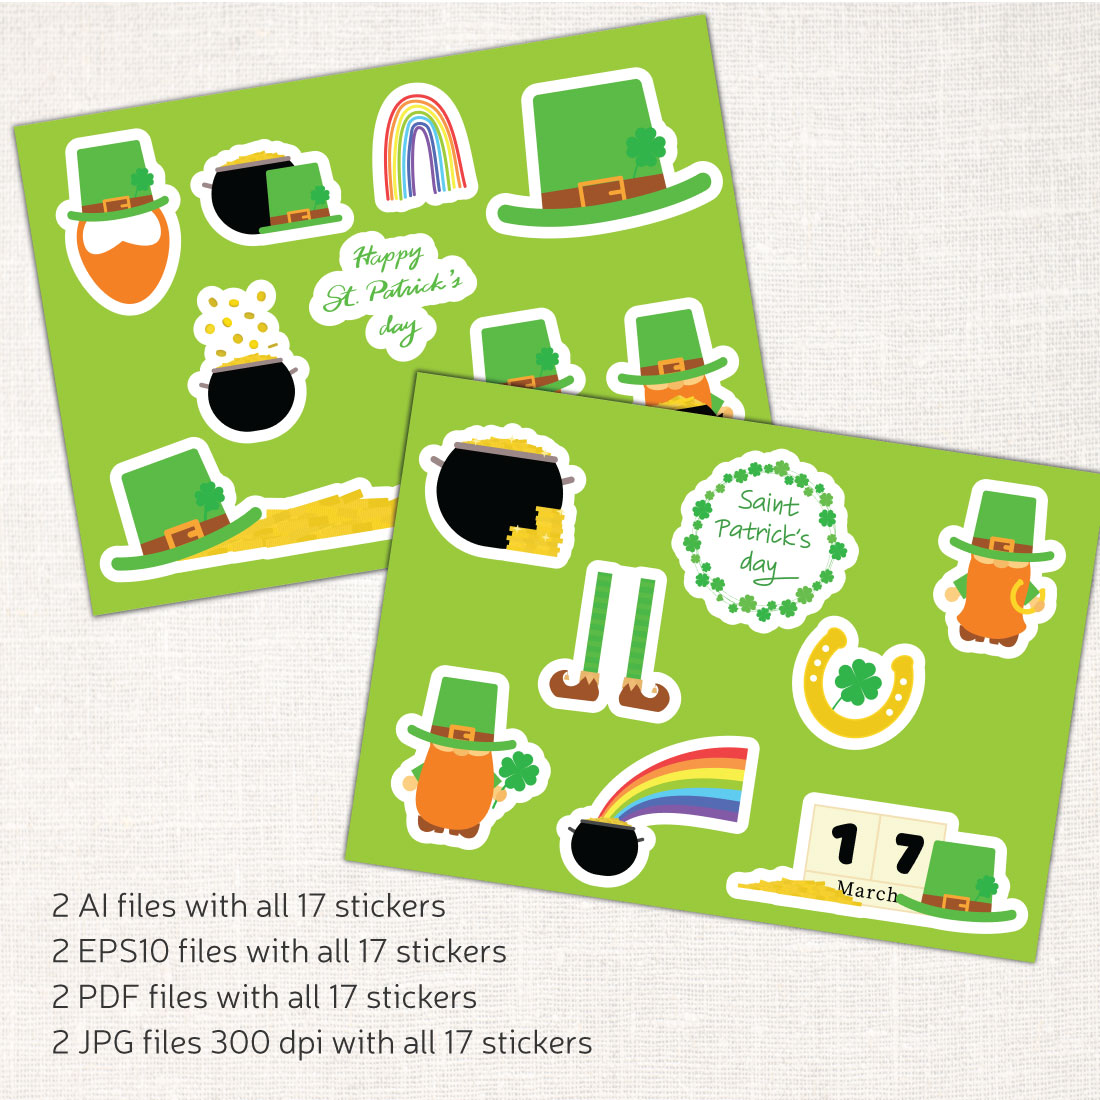 St Patrick stickers preview image.